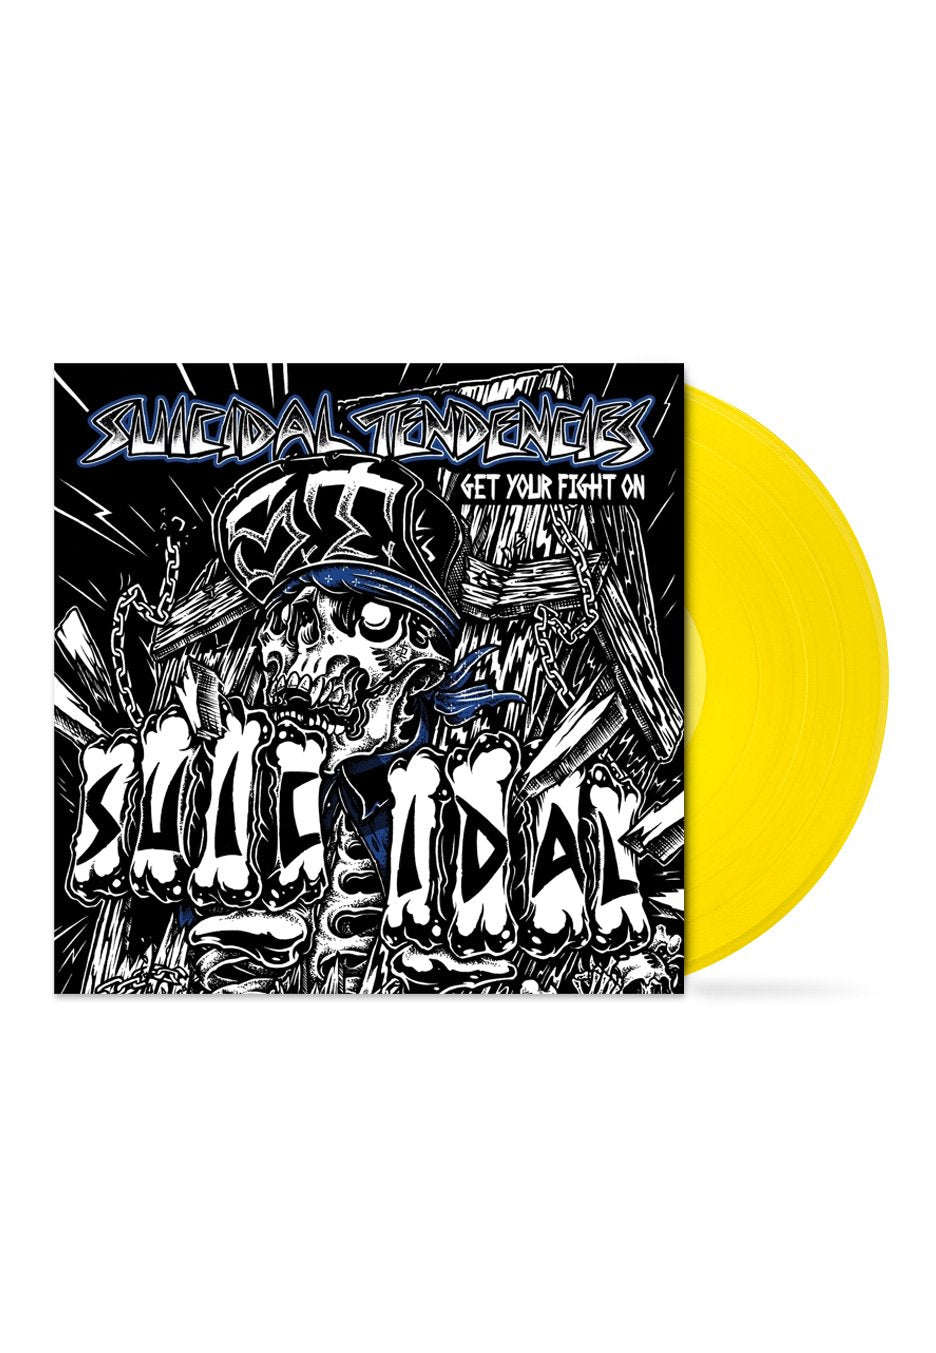 Suicidal Tendencies - Get Your Fight On! EP Transparent Yellow - Colored Vinyl